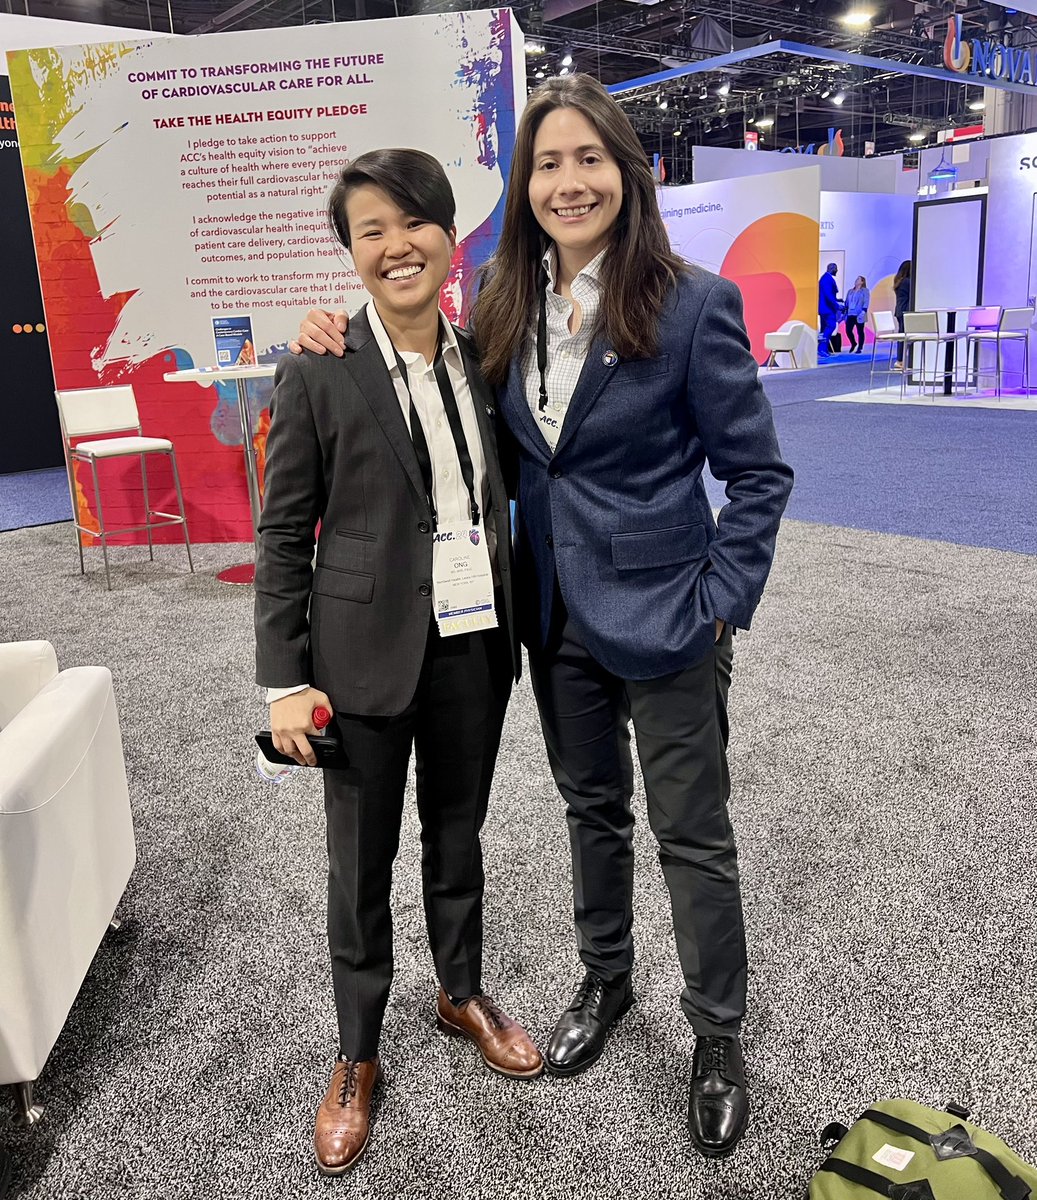 Trying my best to match the dapper style of my mentor @CarolineOng_MD Looking forward to seeing our article “Gender-Affirming Hormone Therapy and Cardiovascular Health in Transgender Adults” hitting the press 📝 🏳️‍⚧️🫀 #ACC2024 @ACCinTouch #ACCDiversity #ACCPride